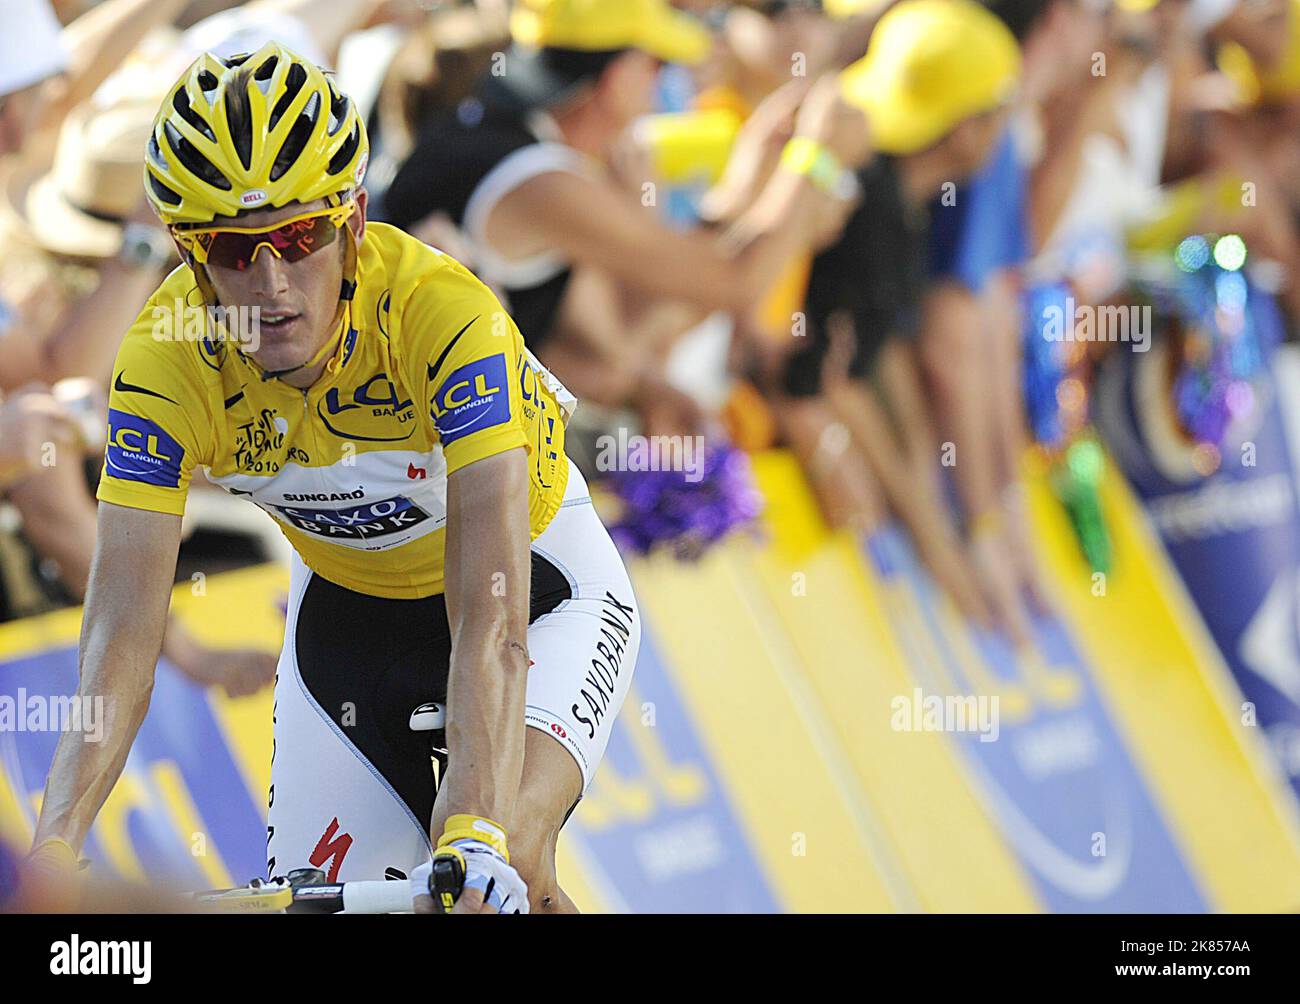 Saxo Bank's Andy Schleck with the yellow jersey at the end of stage eleven  Stock Photo - Alamy